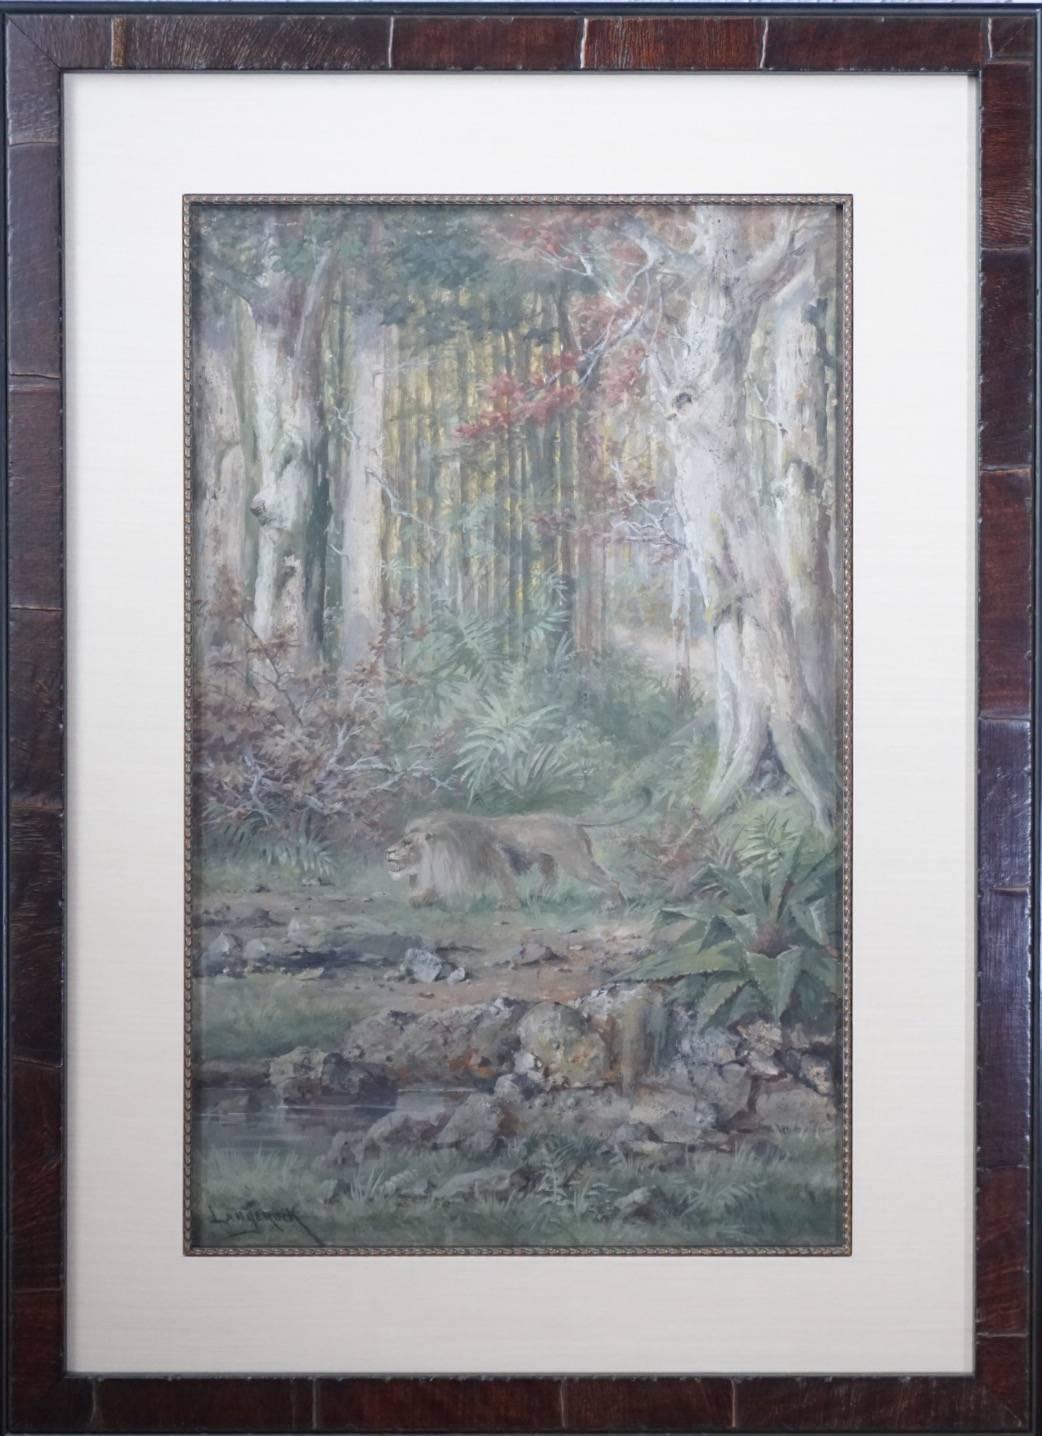 Henri Langerock (1830-1915) Belgium Watercolor of a Prowling Lion in the Jungle. Watercolor on paper on board under archival glass with new frame.

Measures: Sight: 18.5